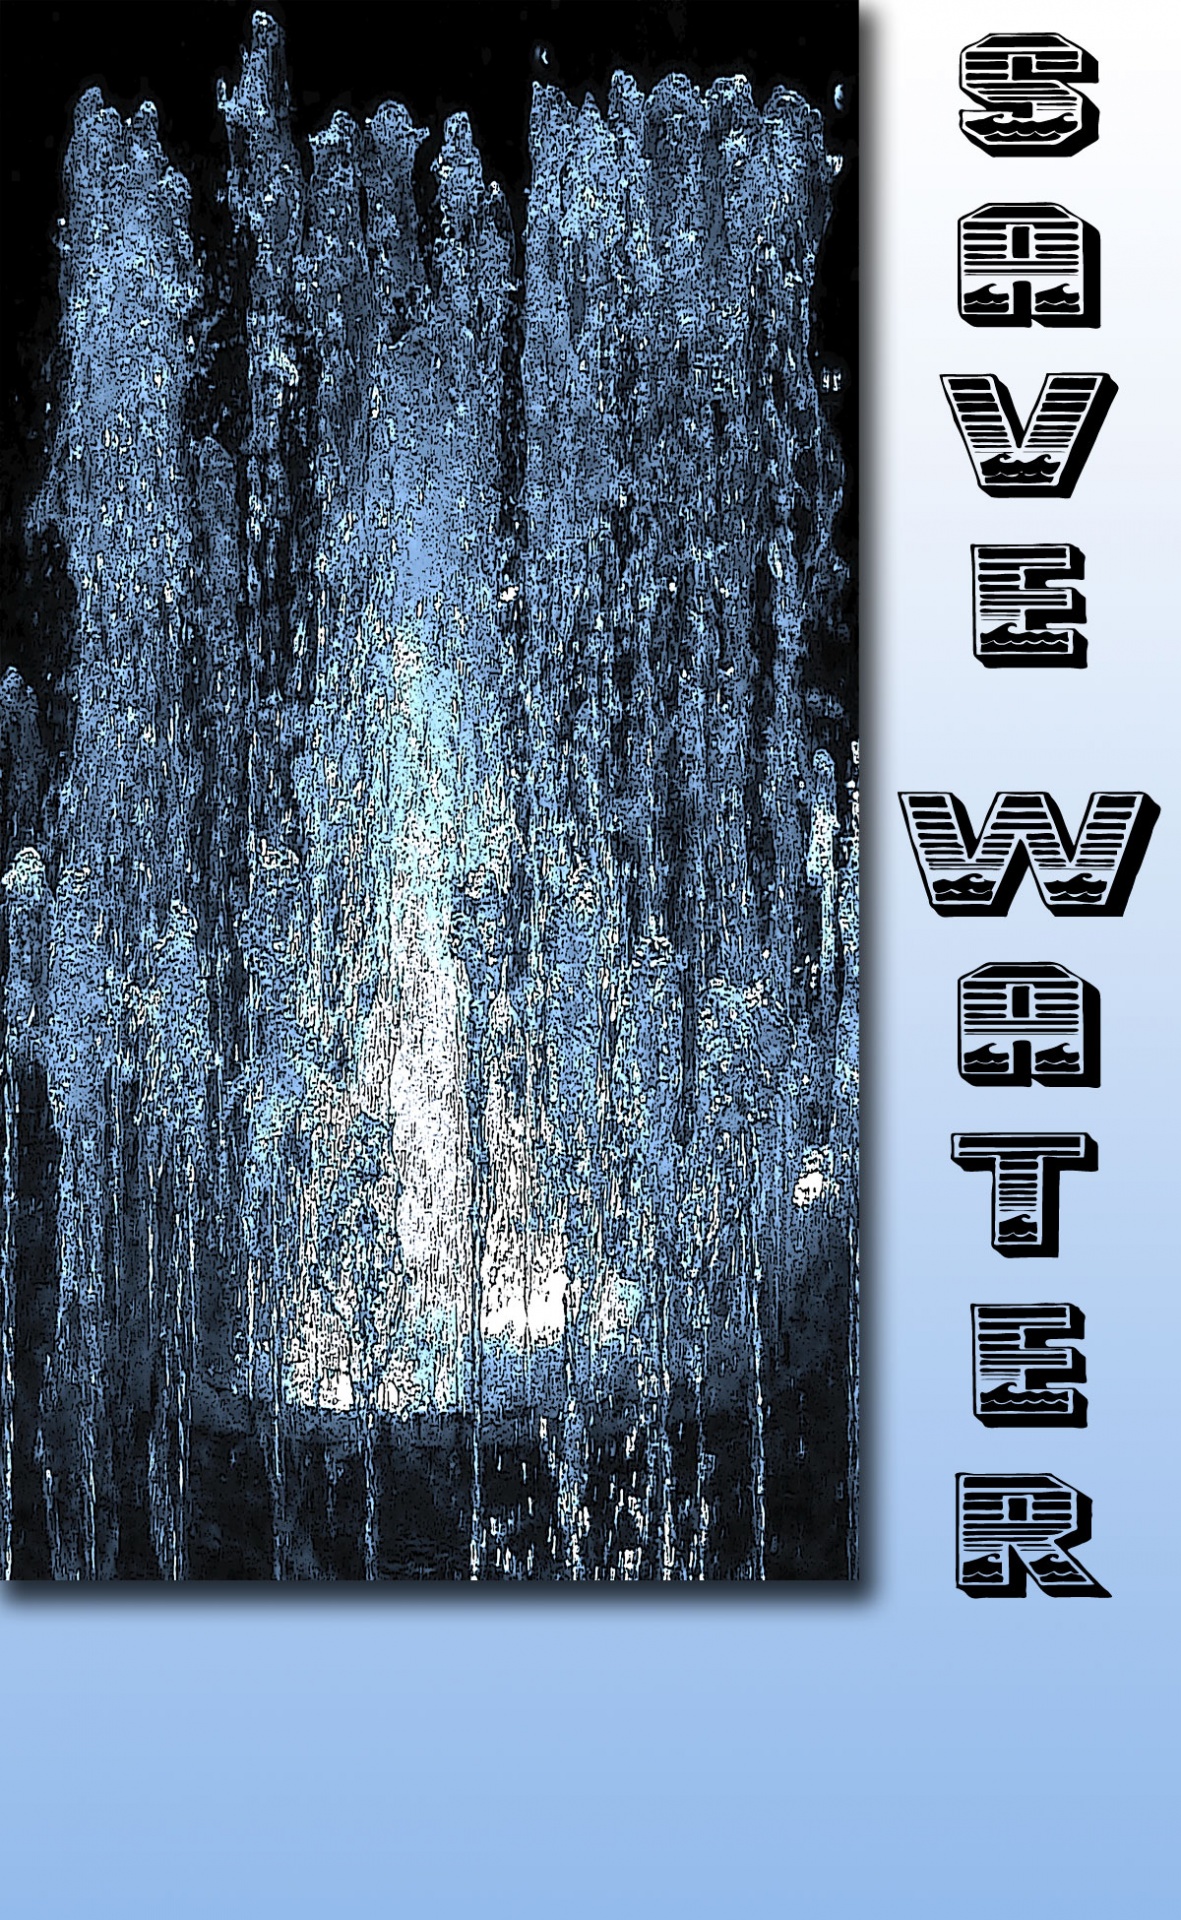 save-water-poster-free-stock-photo-public-domain-pictures